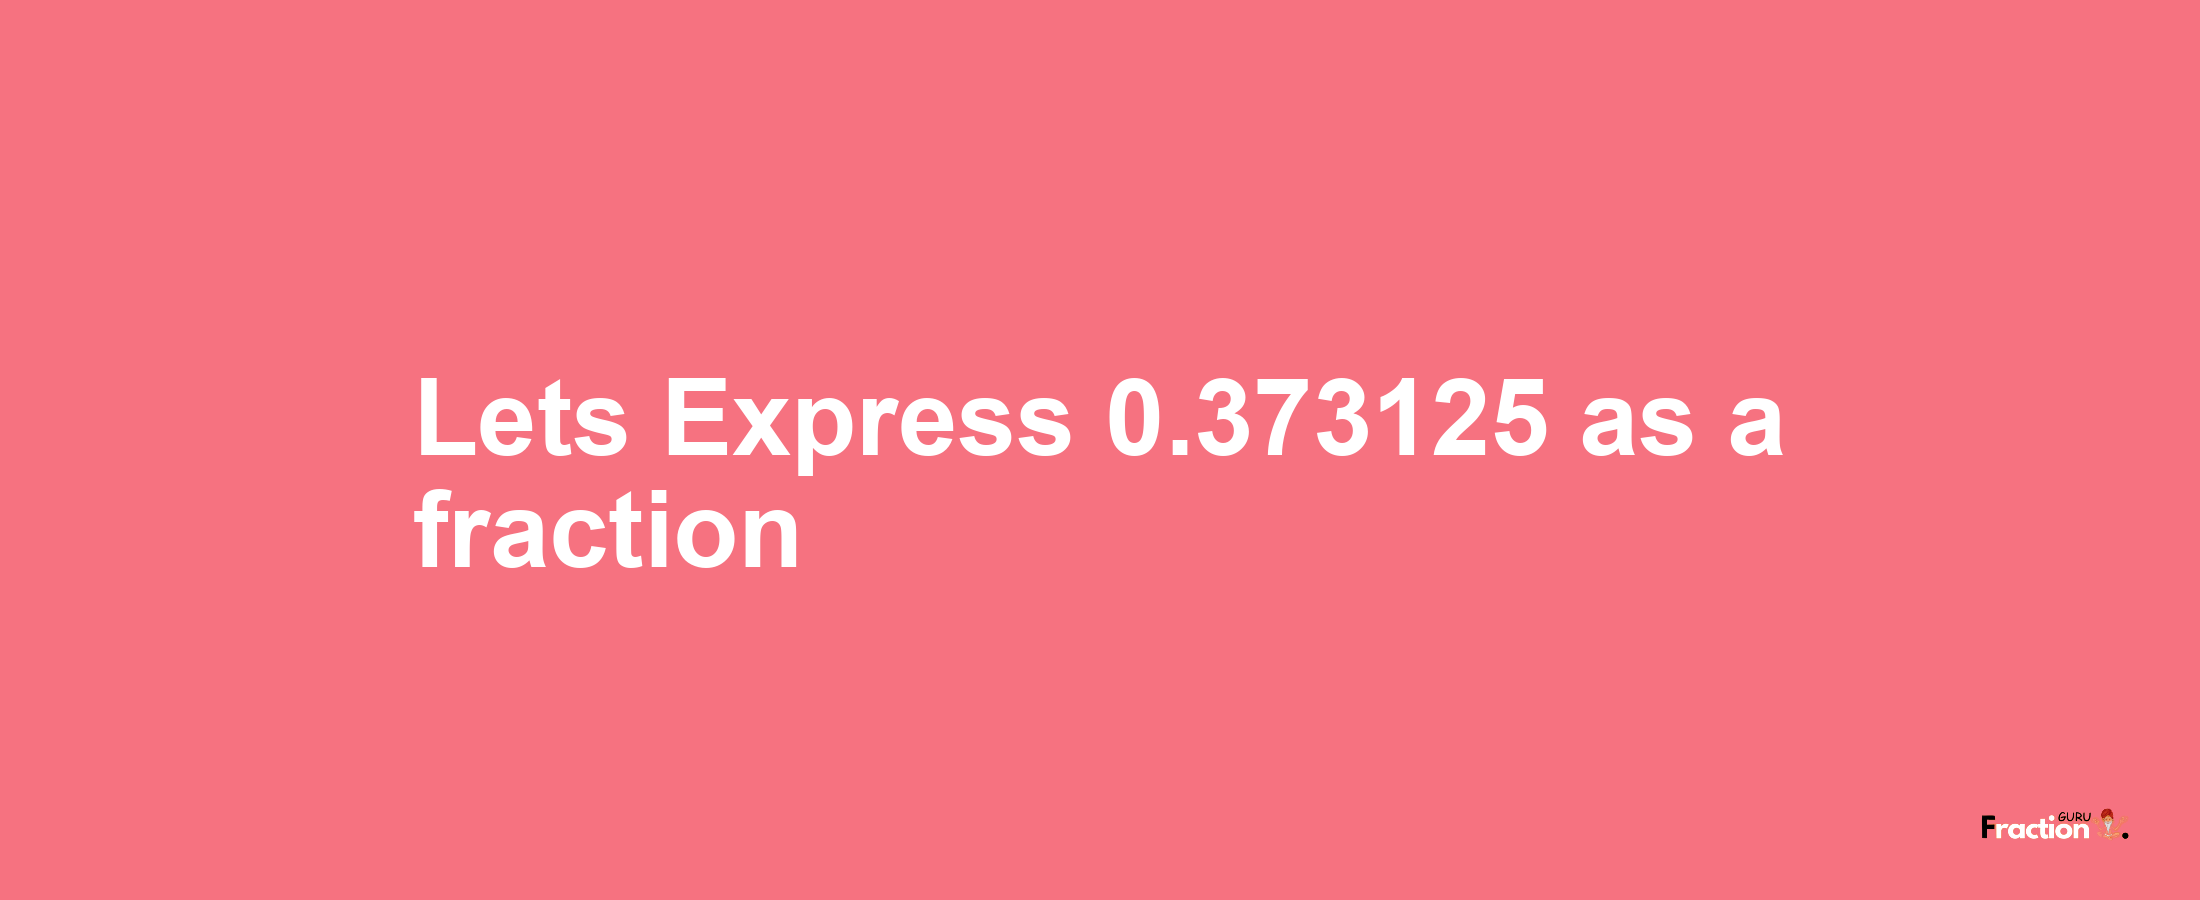 Lets Express 0.373125 as afraction